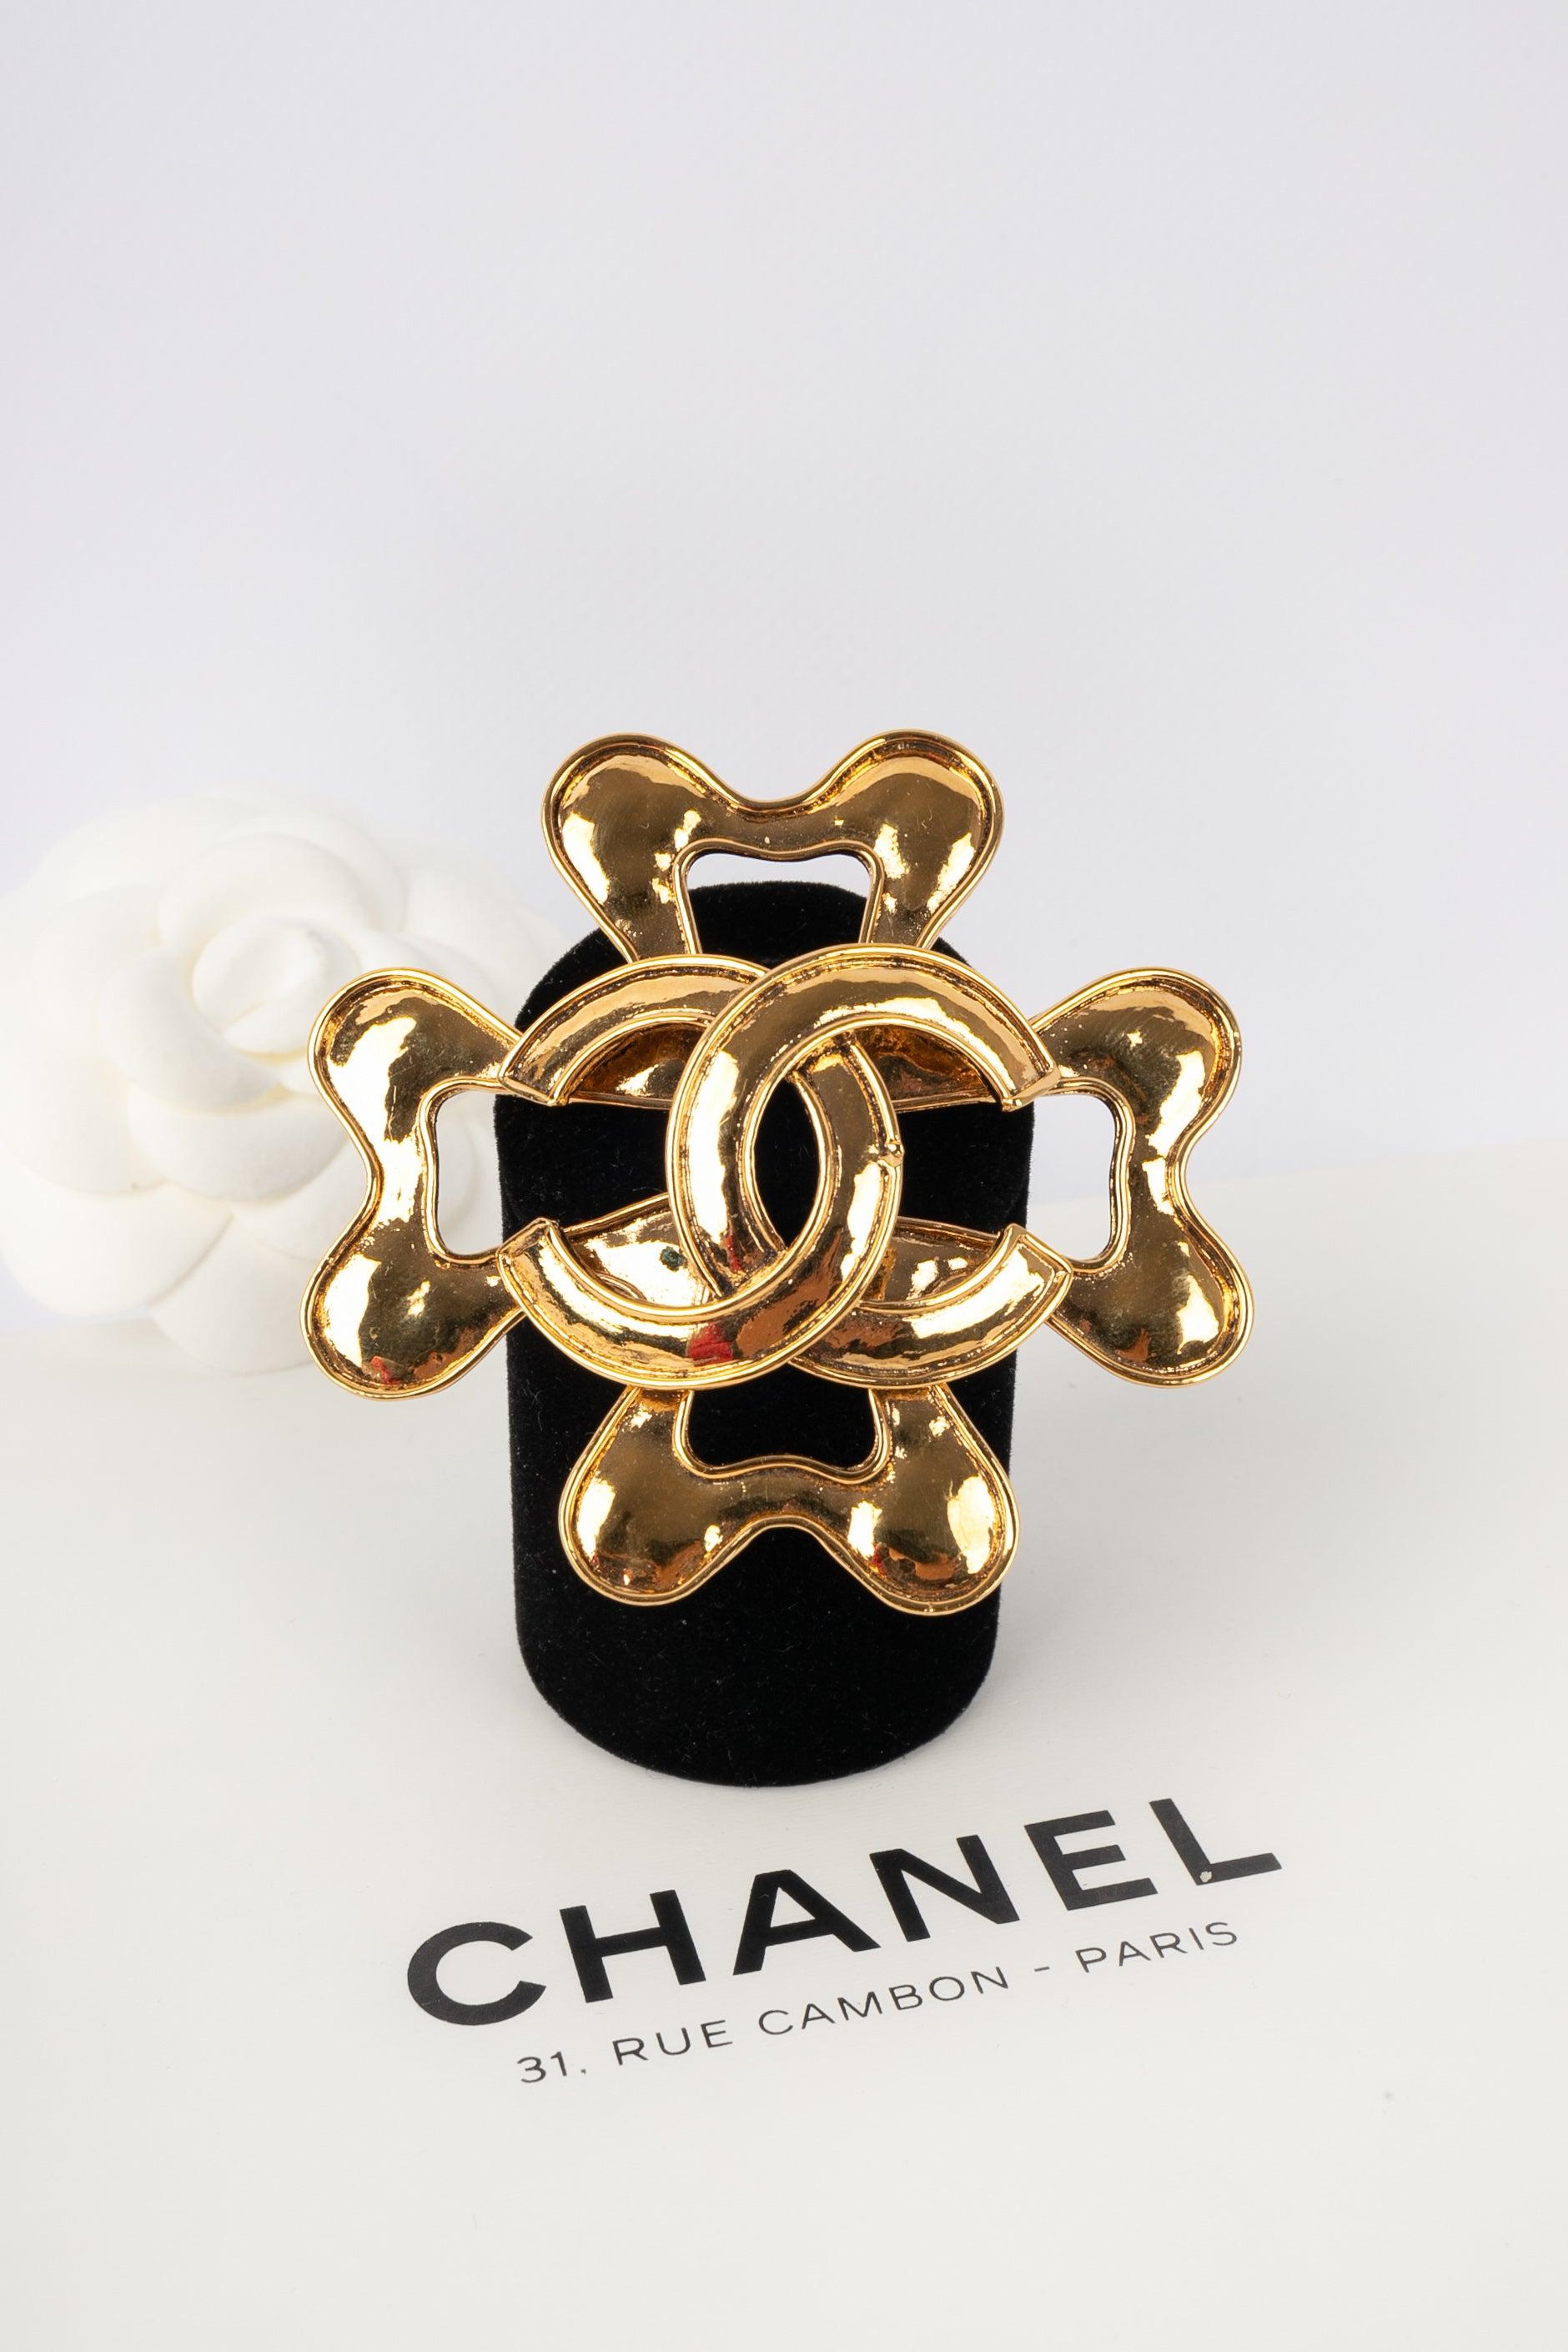 Chanel Brooch in Golden Metal Brooch with CC Logo, 1995 For Sale 2